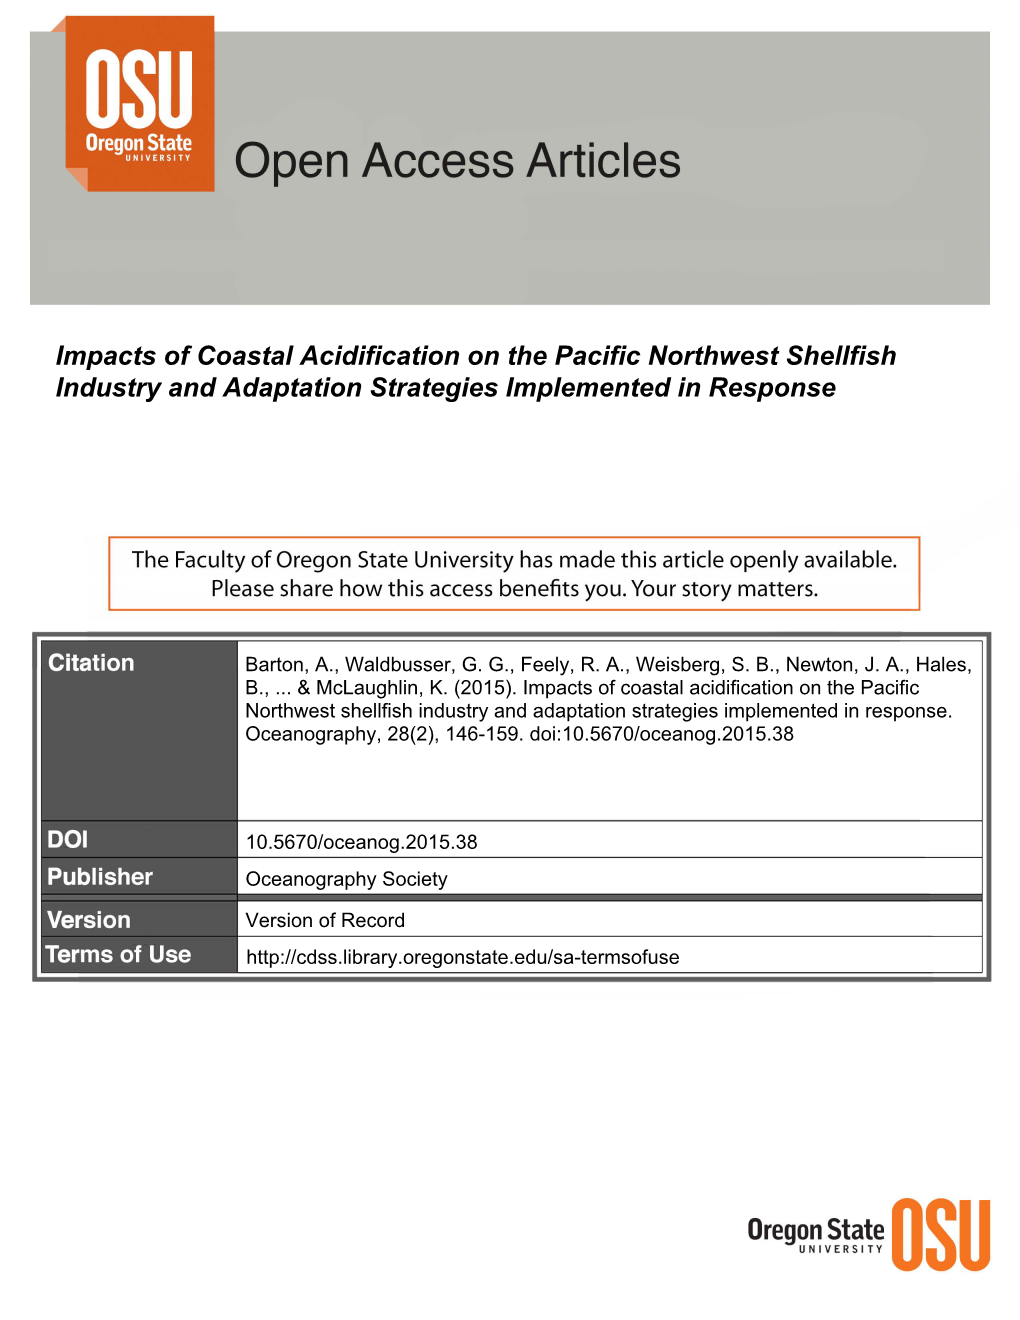 Impacts of Coastal Acidification on the Pacific Northwest Shellfish Industry and Adaptation Strategies Implemented in Response